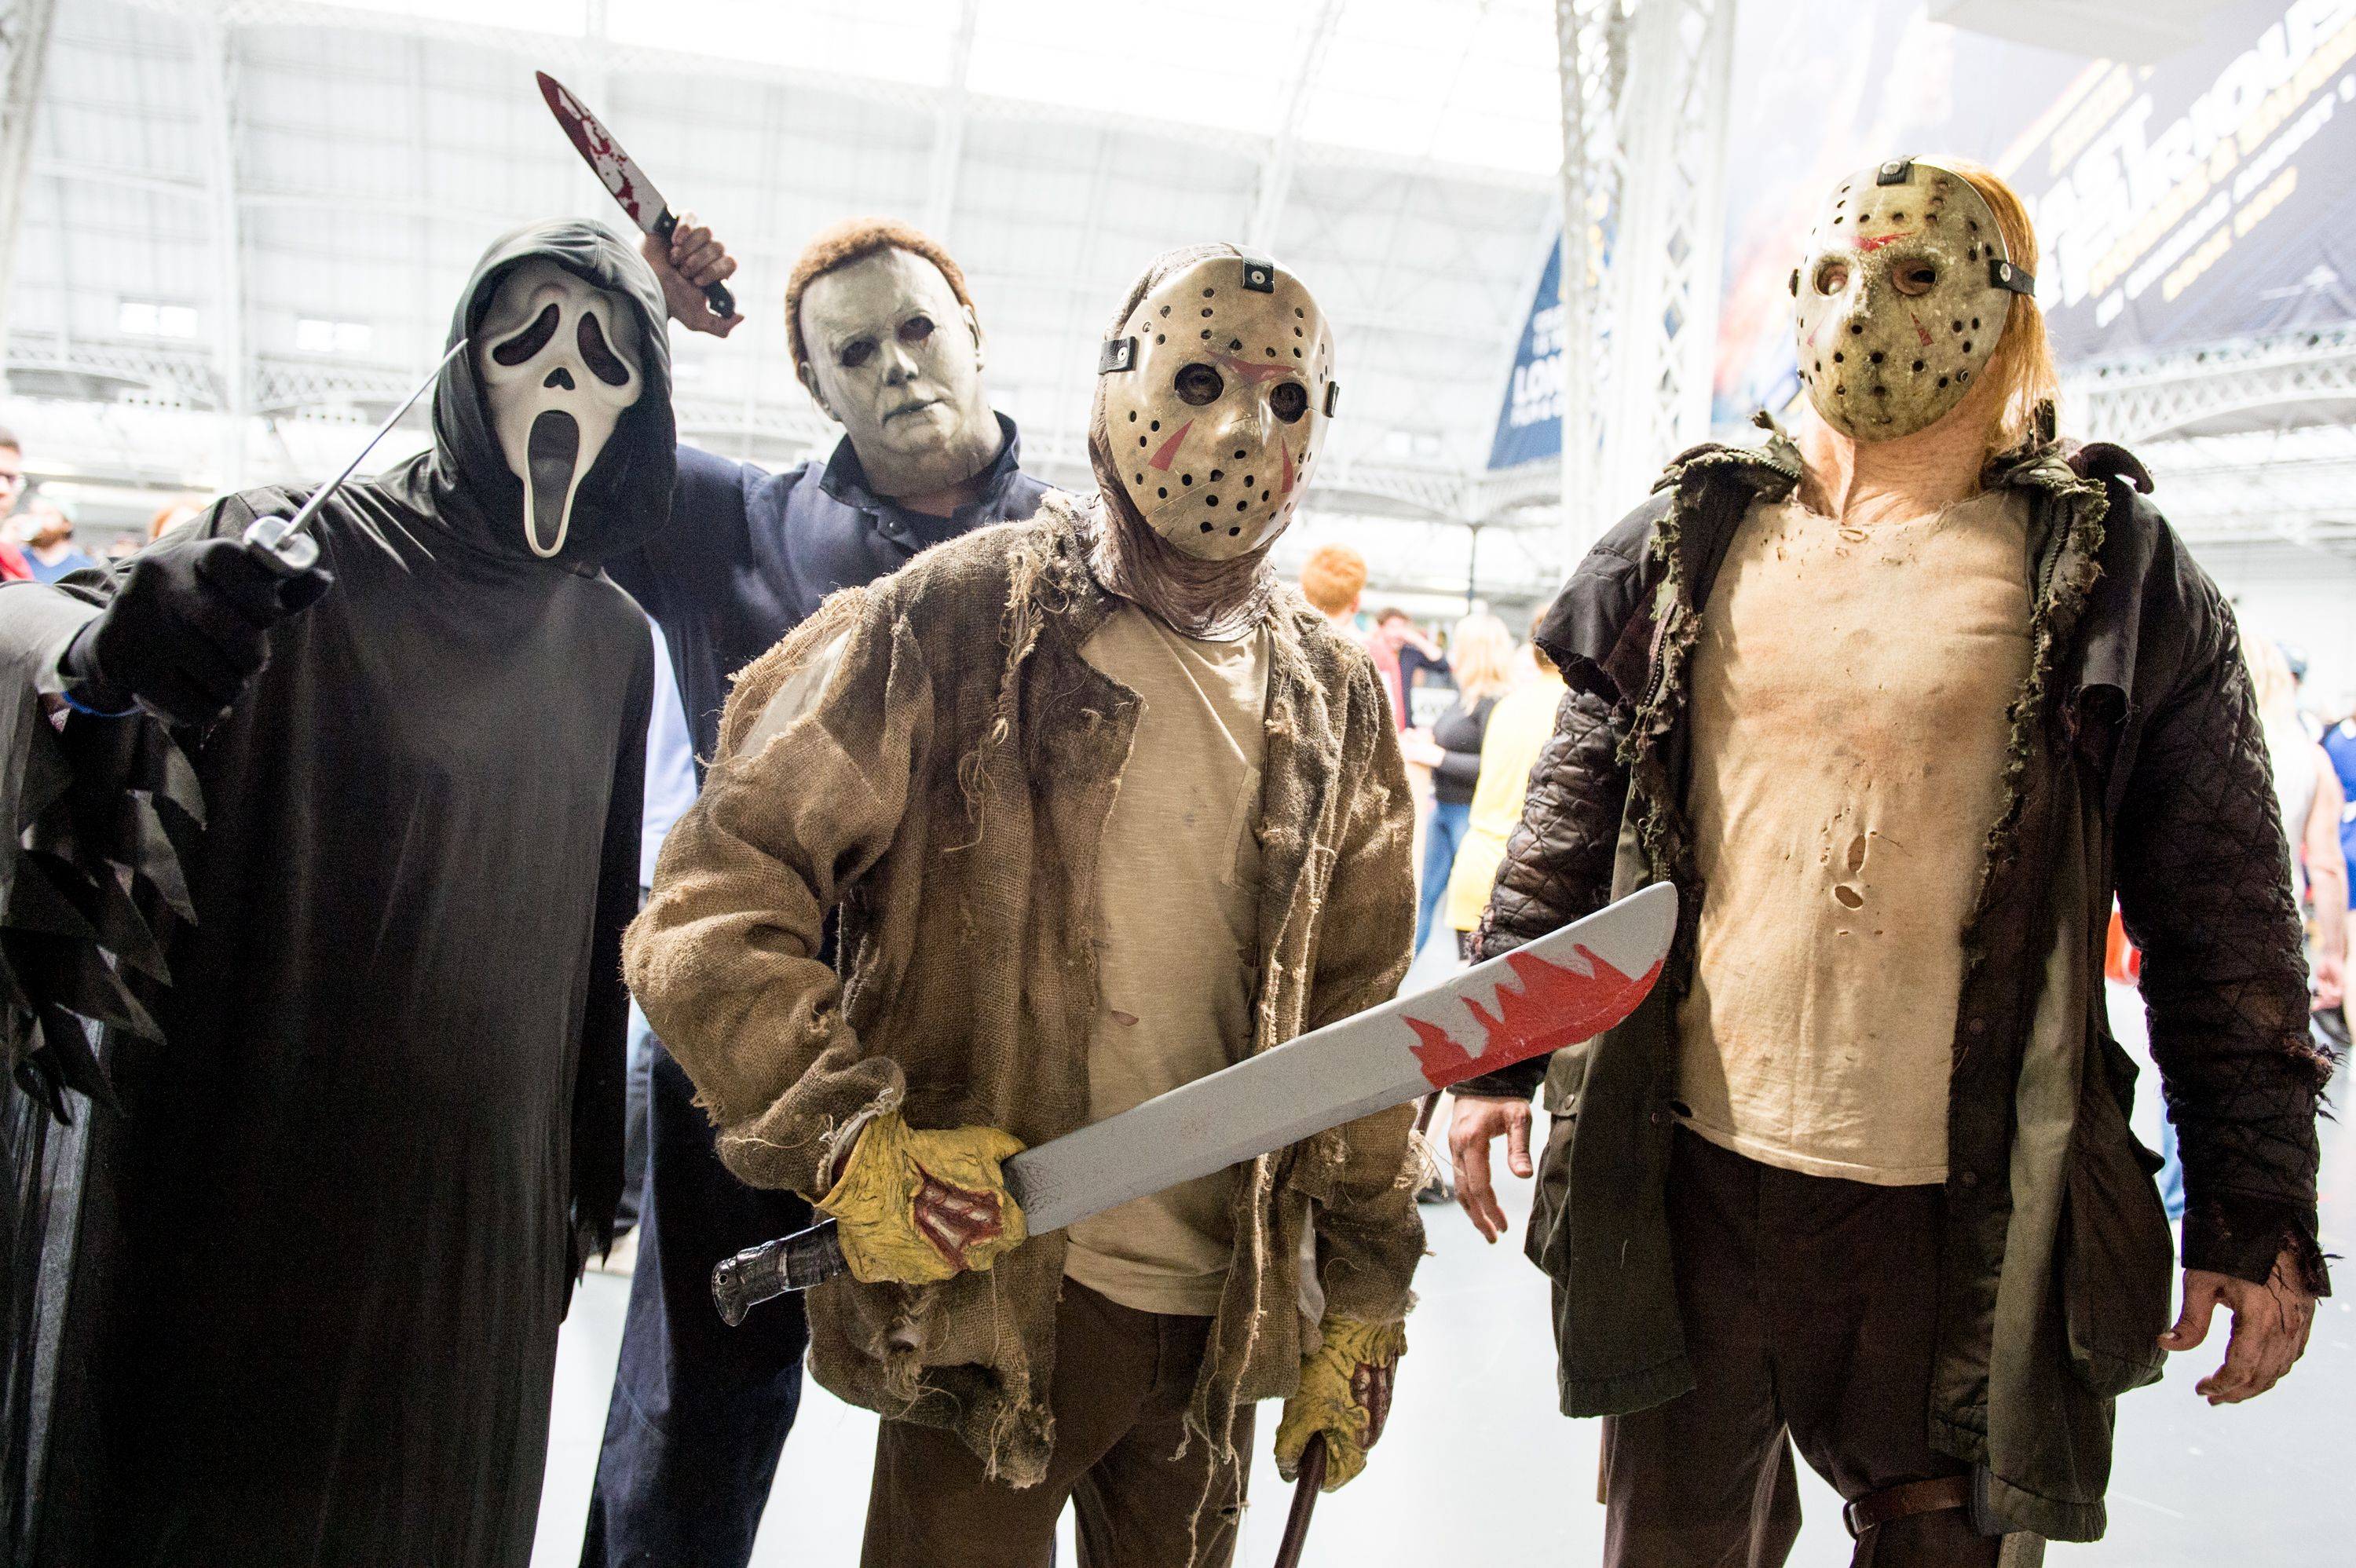 ghost-face-michael-myers-two-jason-voorhees